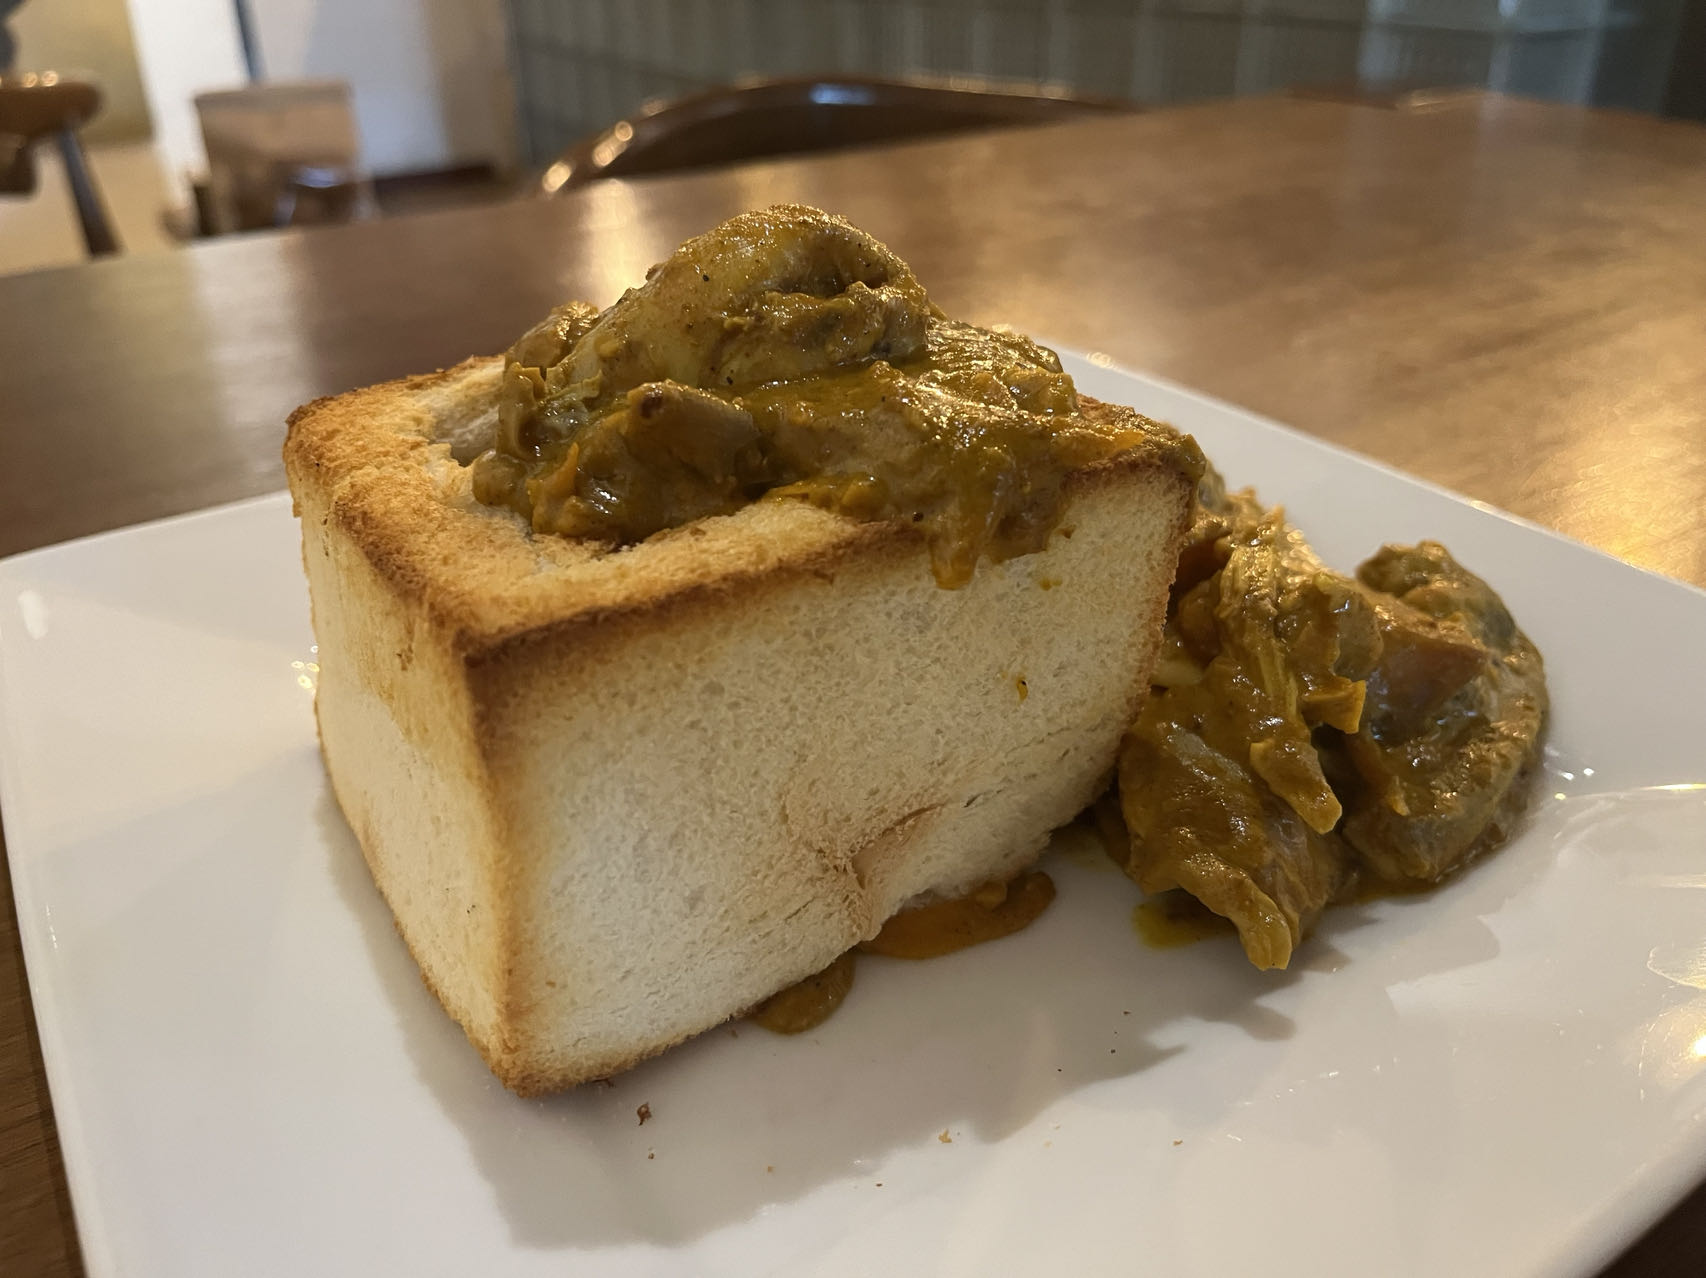 A chicken bunny chow, a dish originating from Durban, South Africa / CGTN